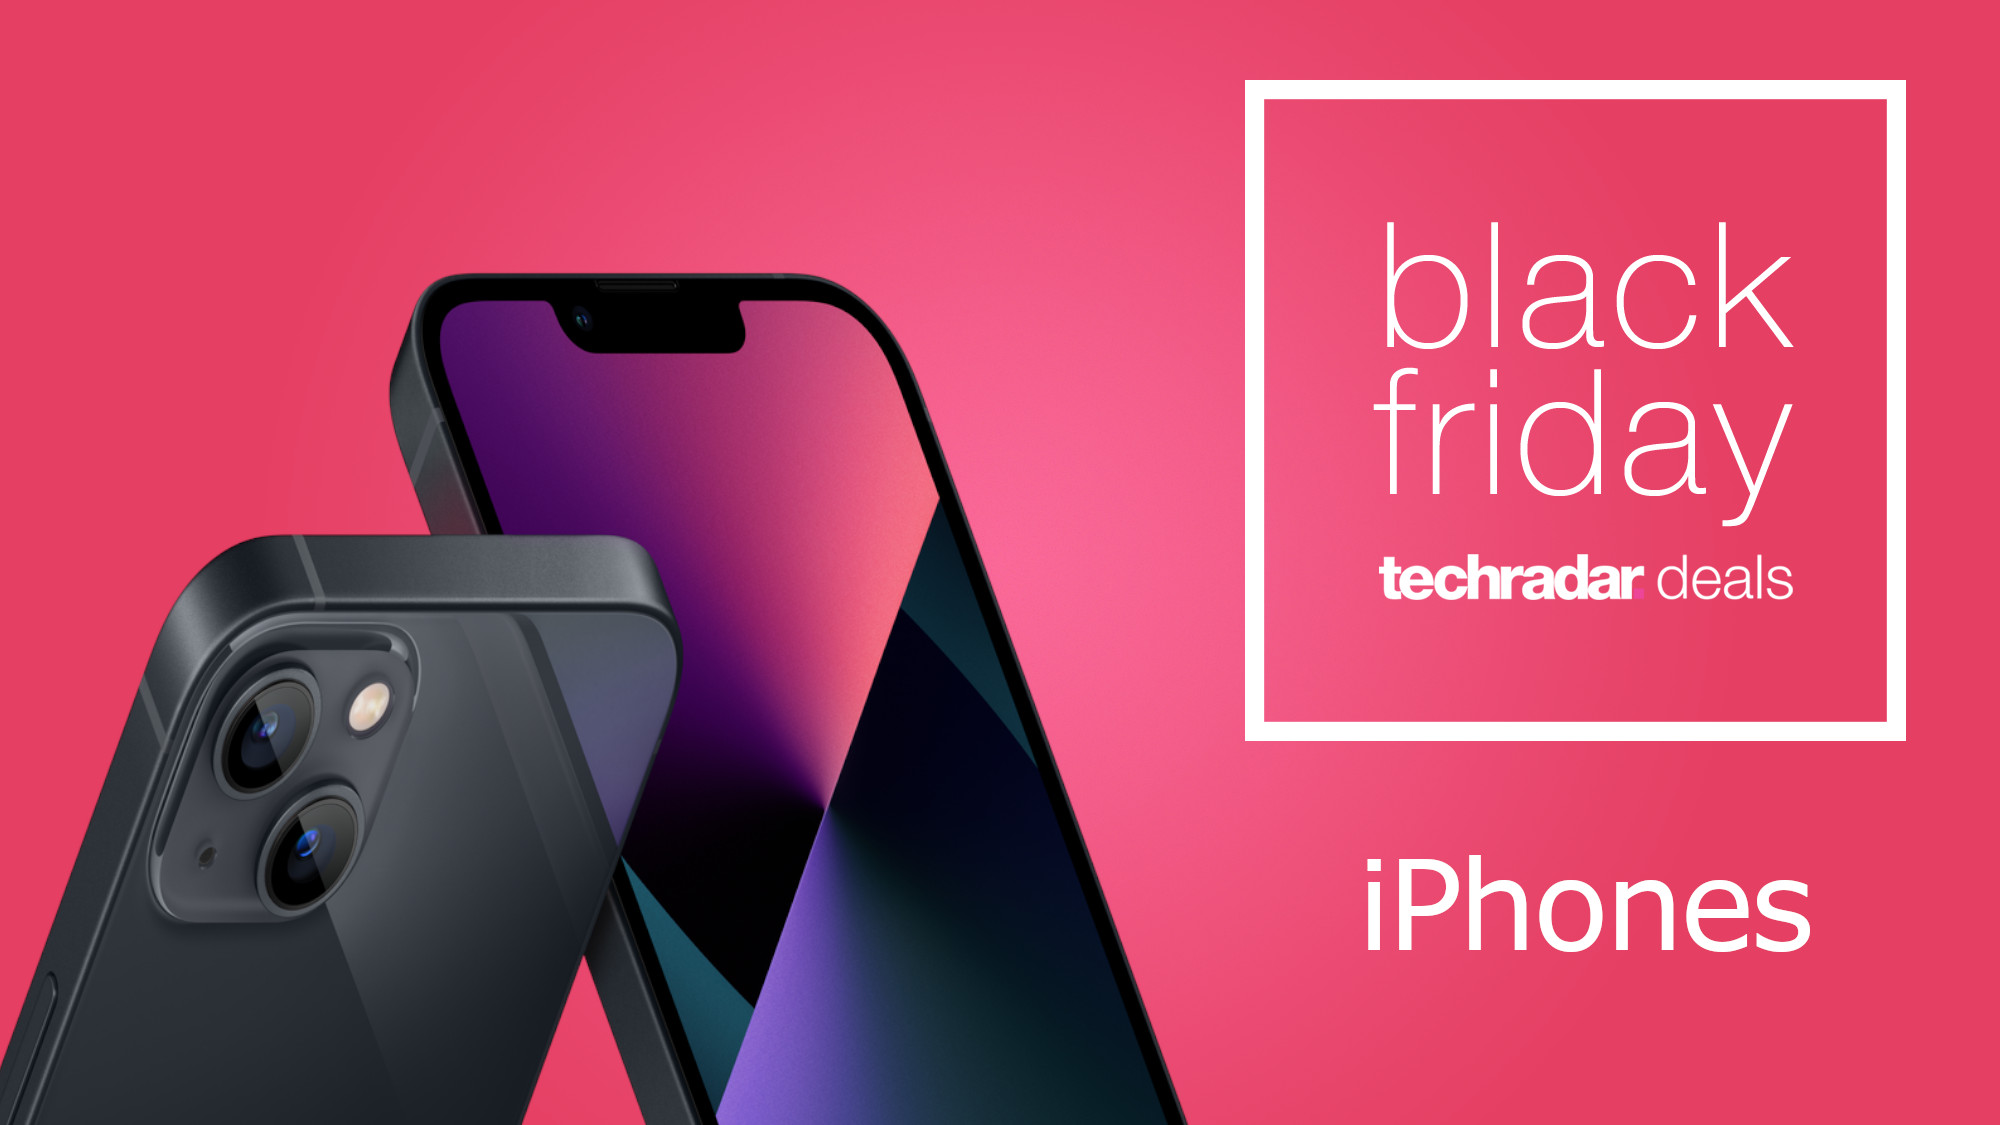 Black Friday Iphone Deals 2021 Sales Still Live For Iphone 13 Iphone 12 And More Techradar